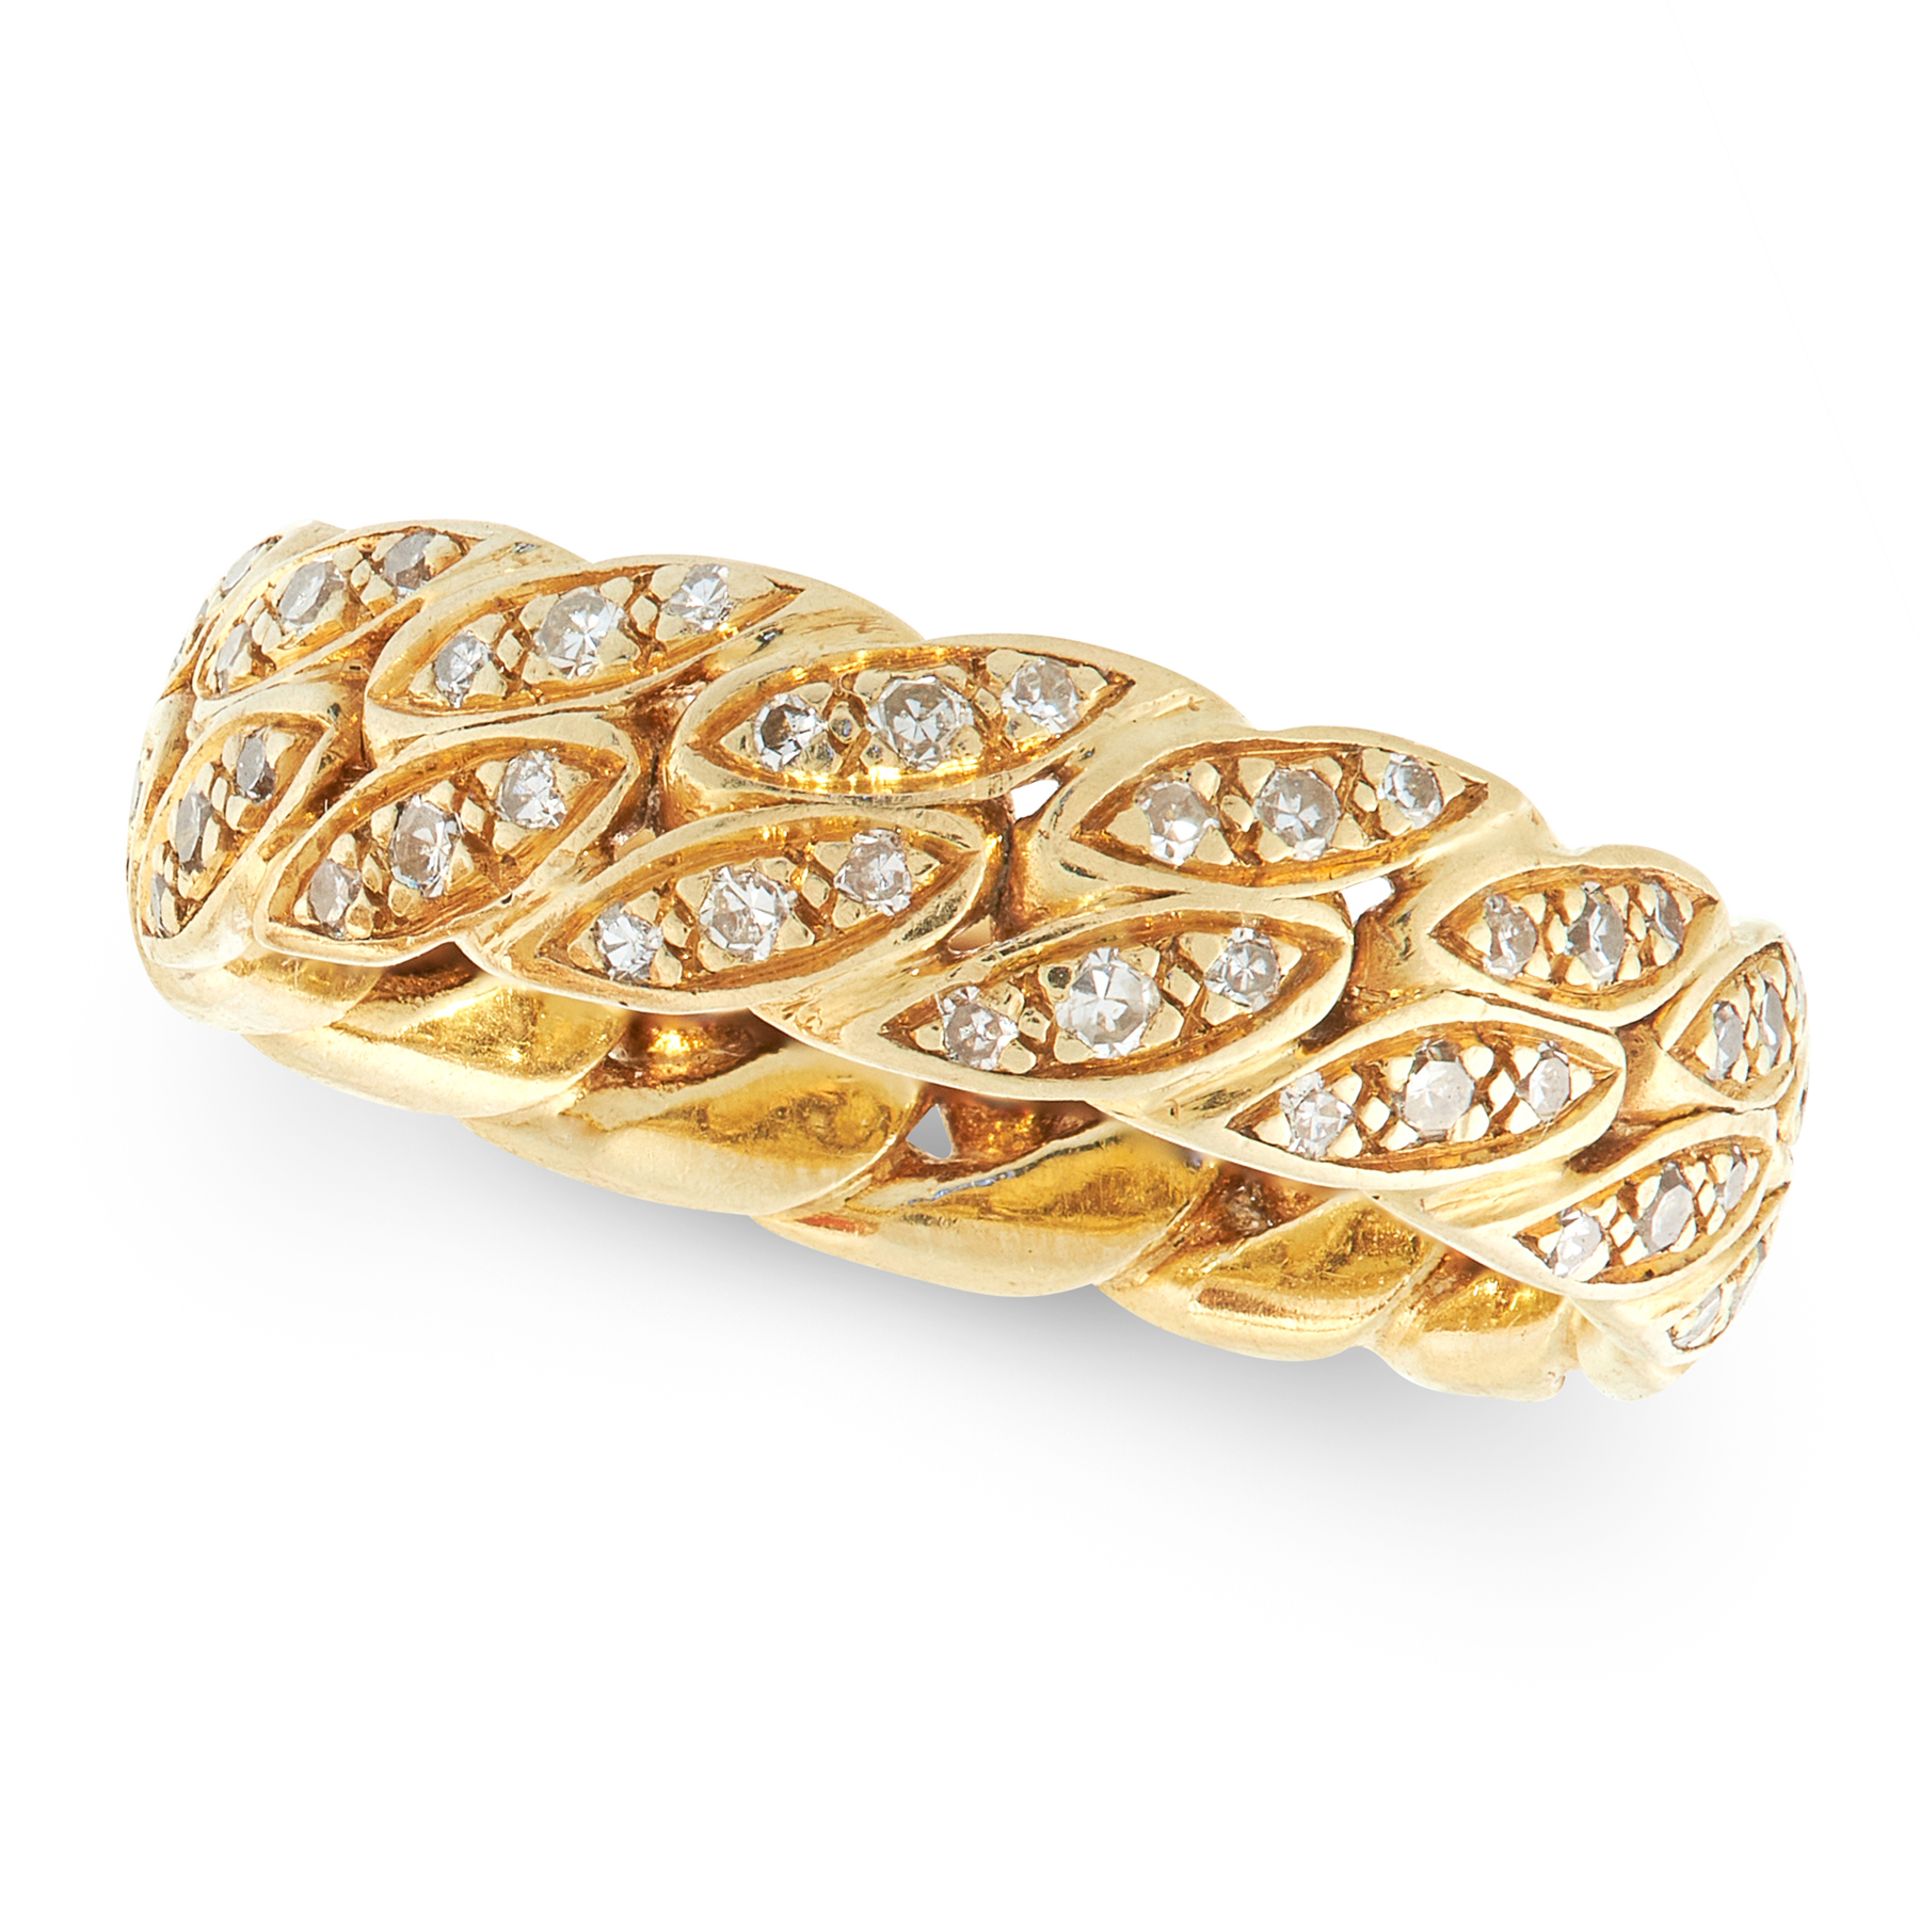 A DIAMOND RING, WEMPE in 18ct yellow gold, in the form of a rope set with round cut diamonds, signed